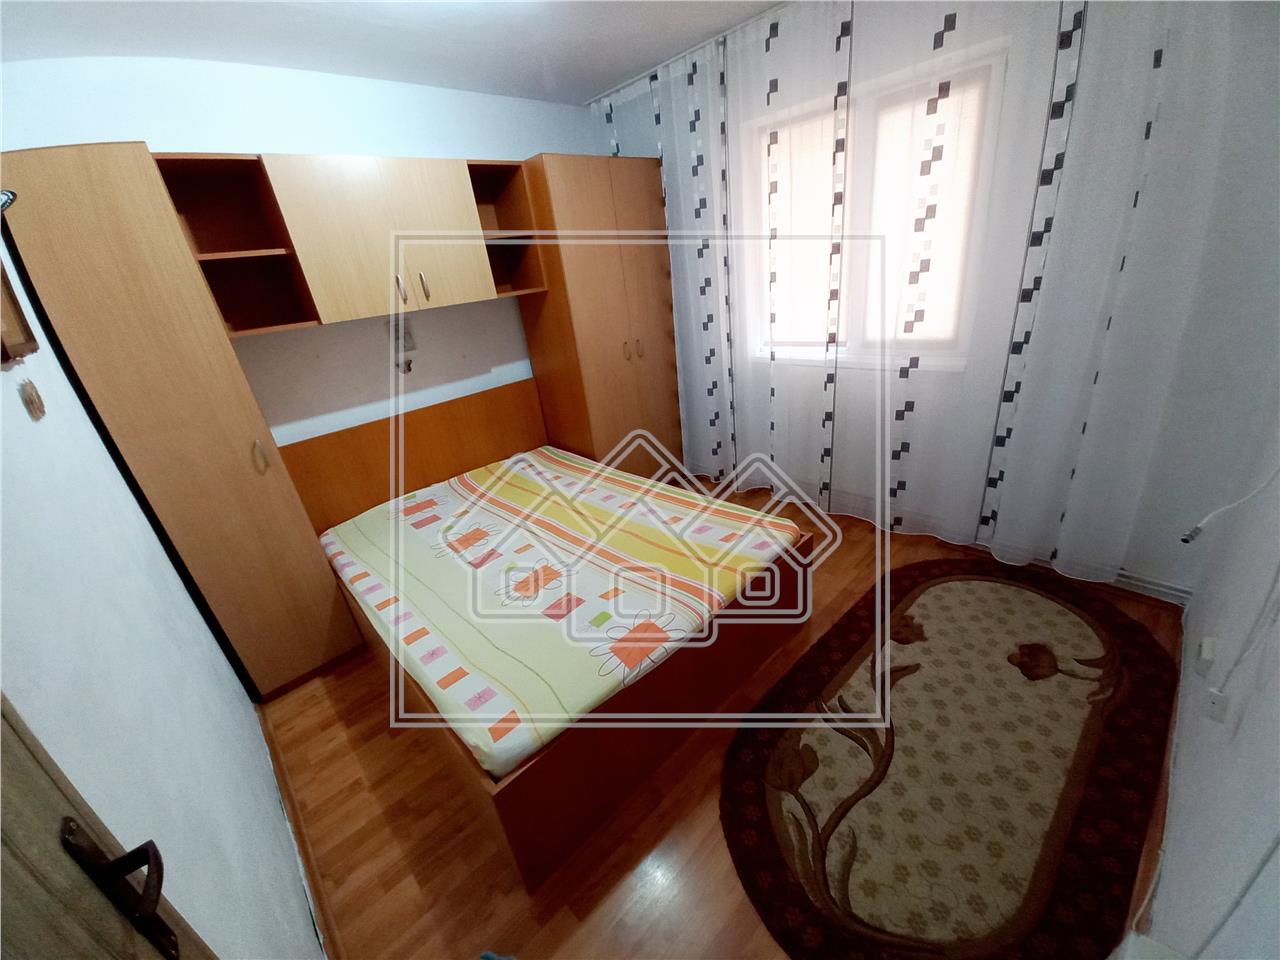 Apartment for sale in Sebes - 2 rooms - Mihail Kogalniceanu